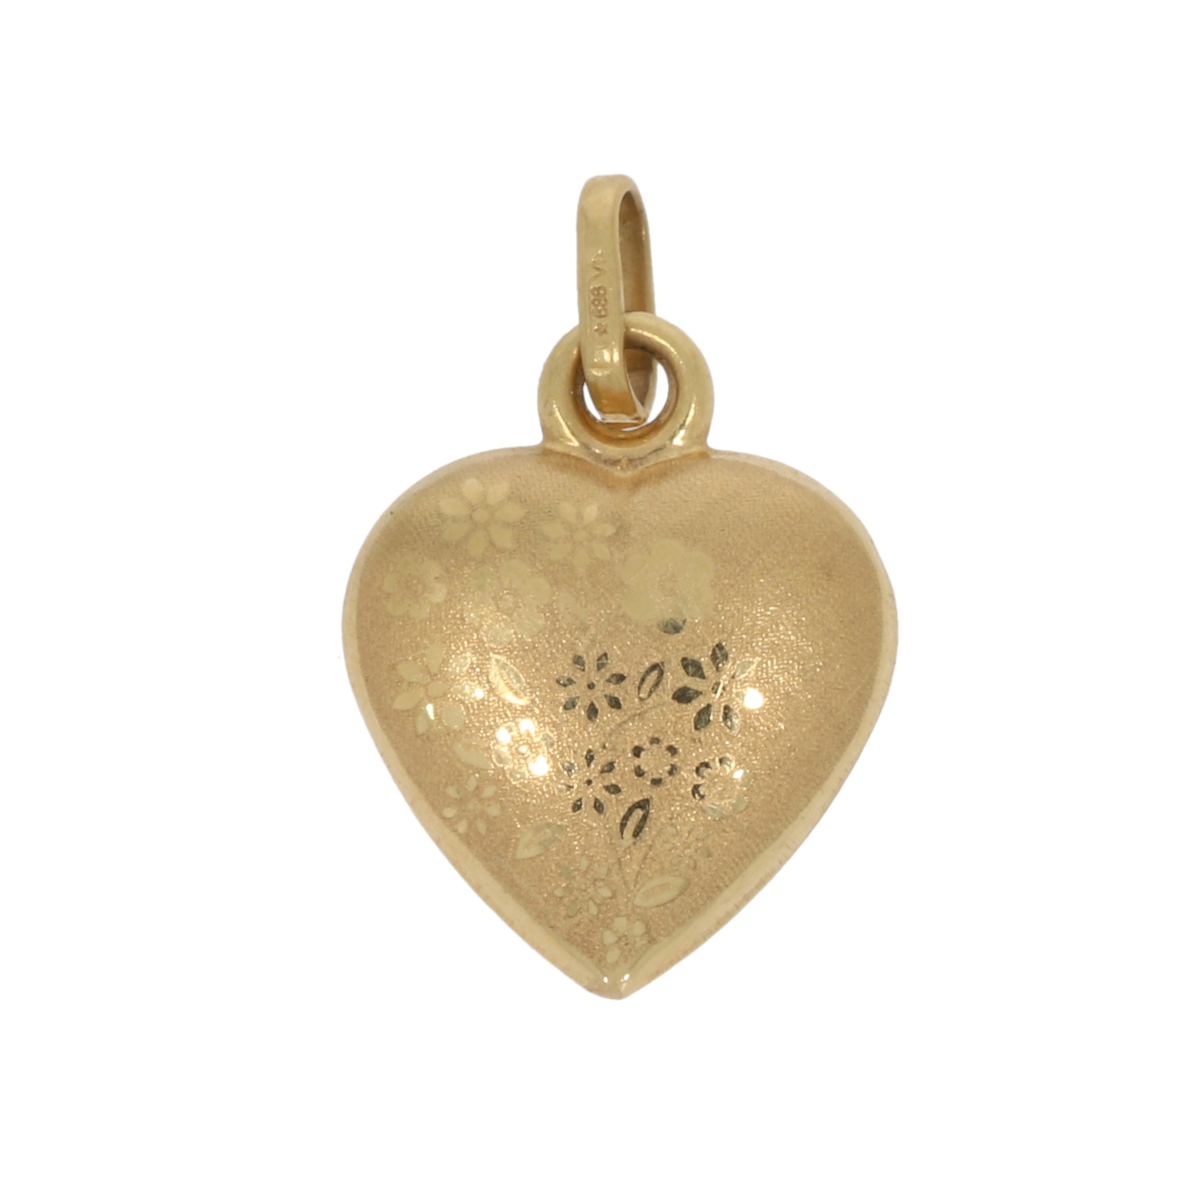 Pendant in the form of a heart